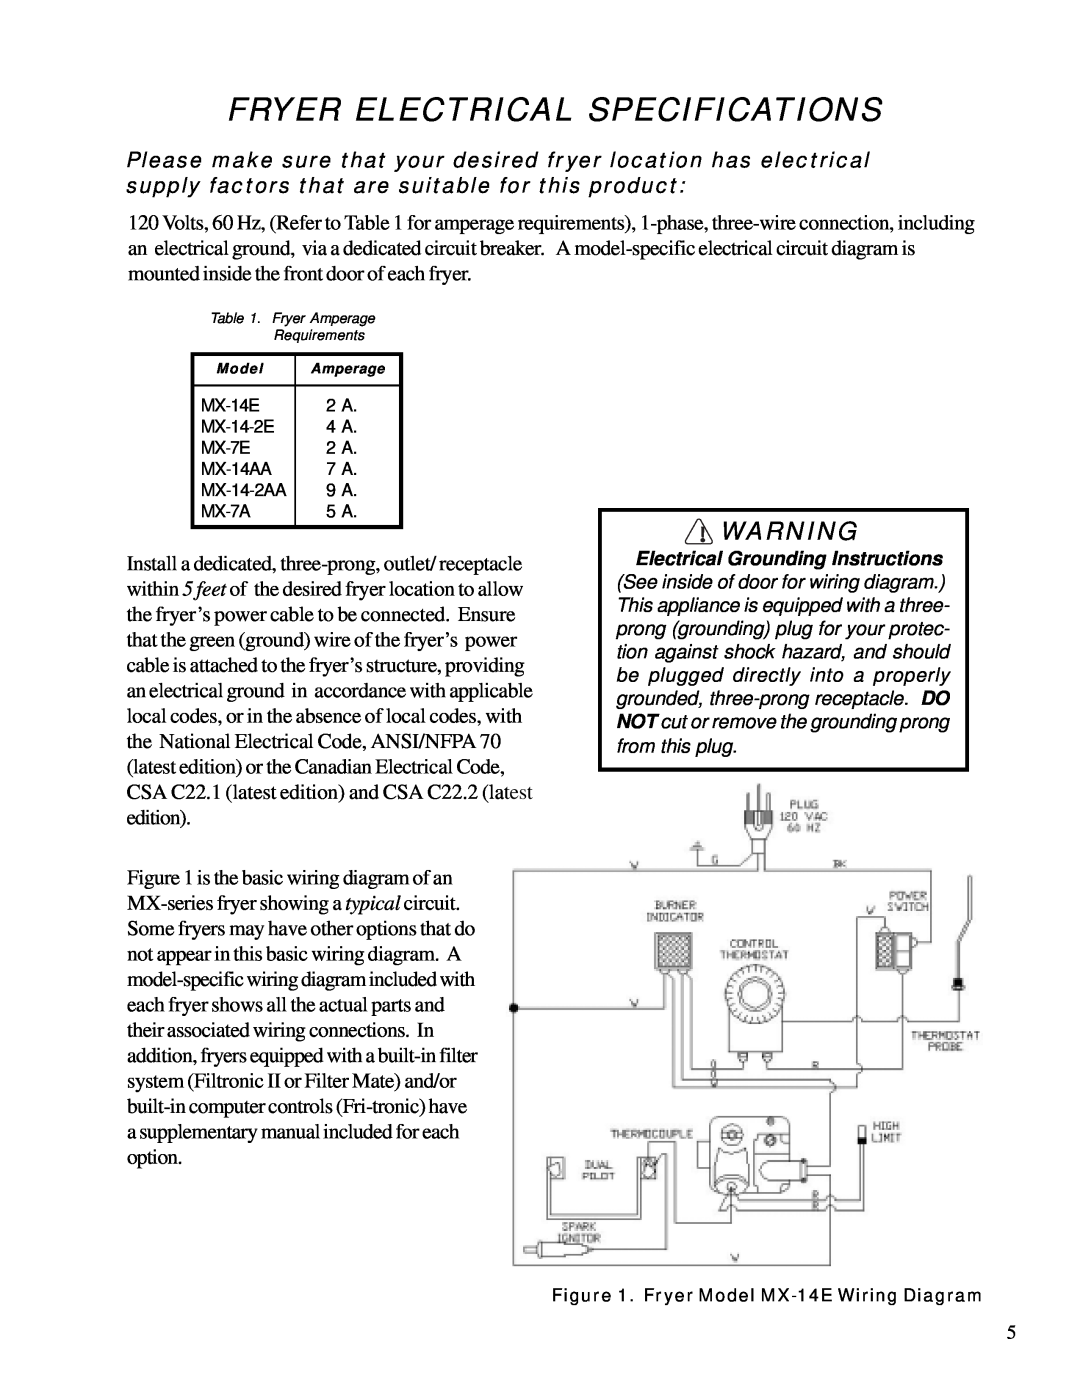 Anetsberger Brothers MX-14-2AA, MX-7E, MX-14E, MX-14AA Fryer Electrical Specifications, Electrical Grounding Instructions 